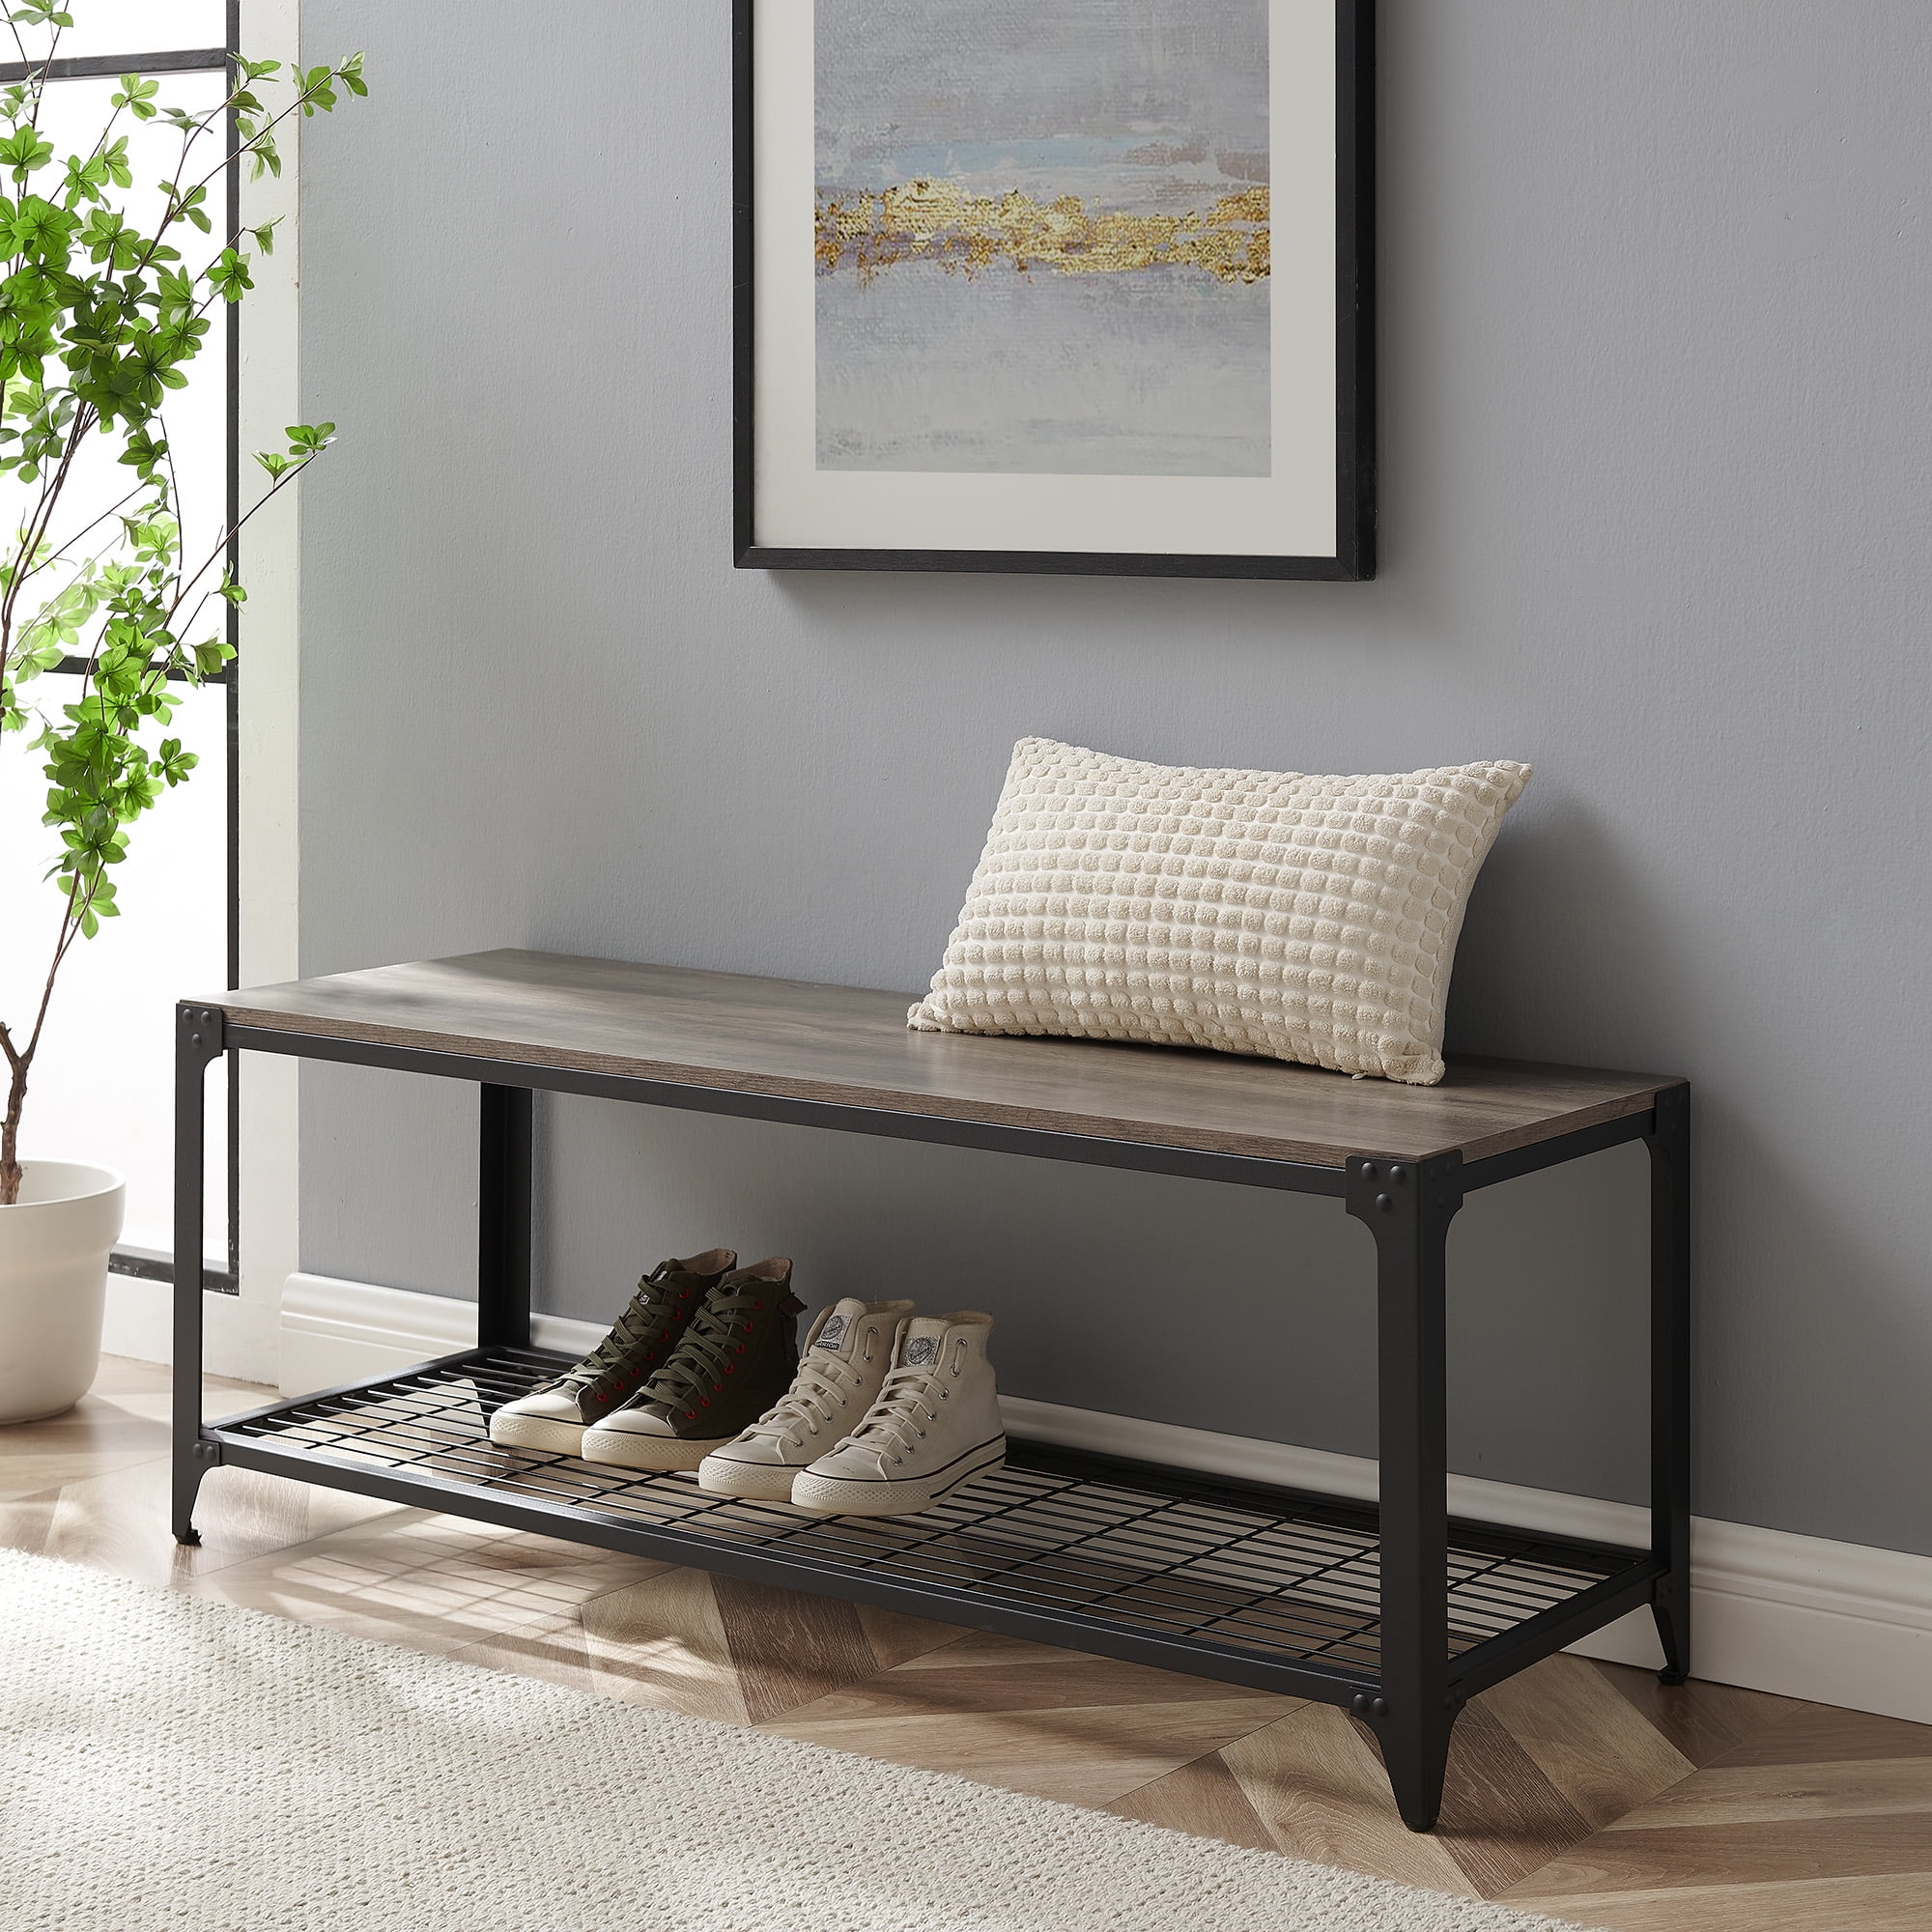 Wilson Riveted Grey Wash Entry Bench by River Street Designs - Walmart.com